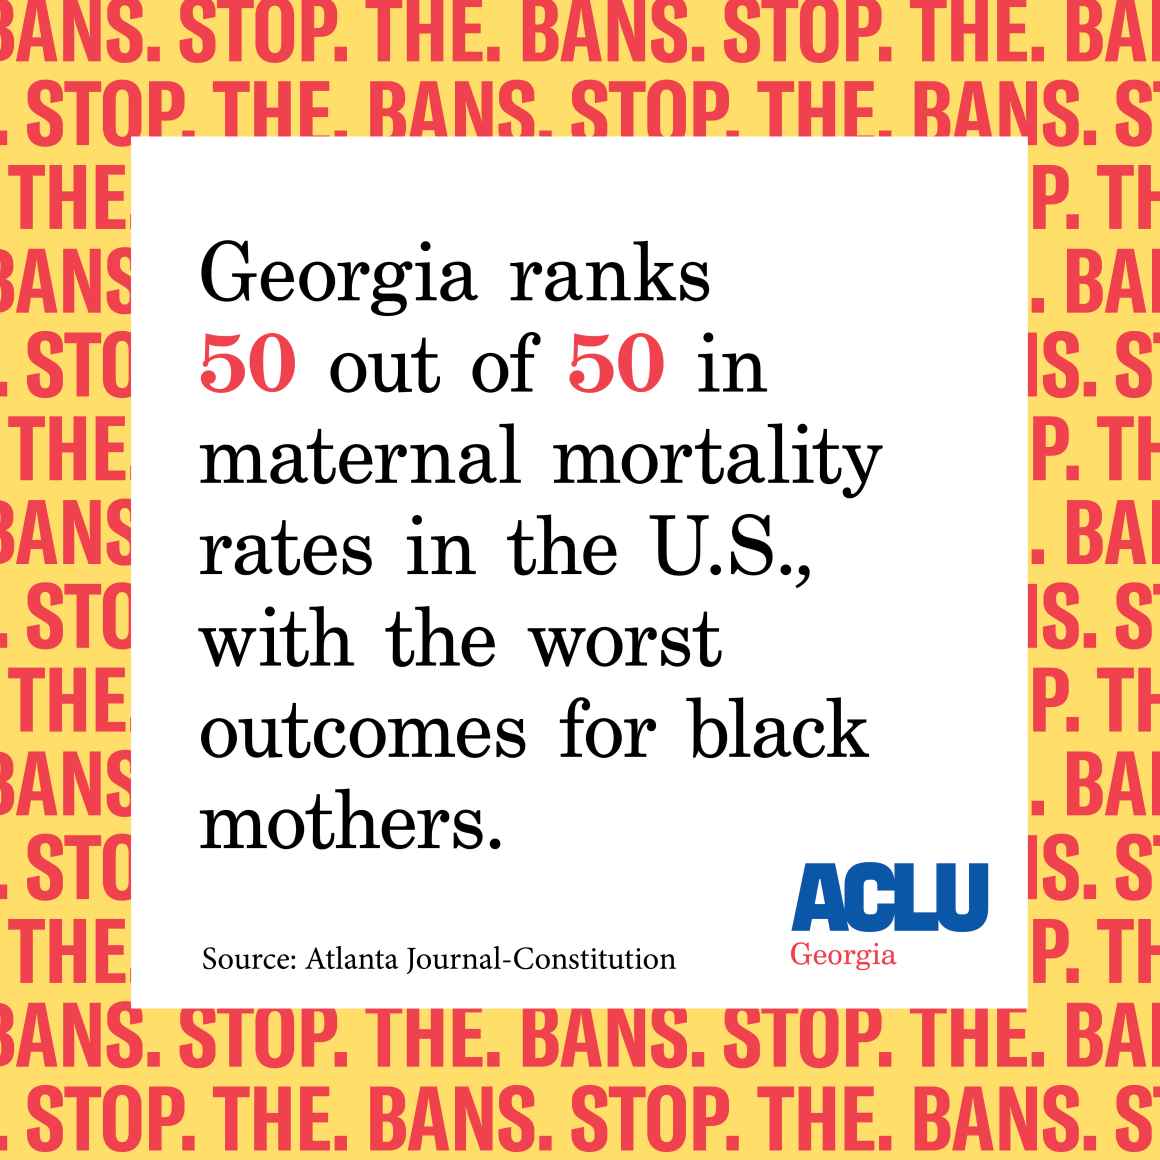 Georgia ranks 50 out of 50 in maternal mortality rates in the U.S., with the worst outcomes for black mothers.